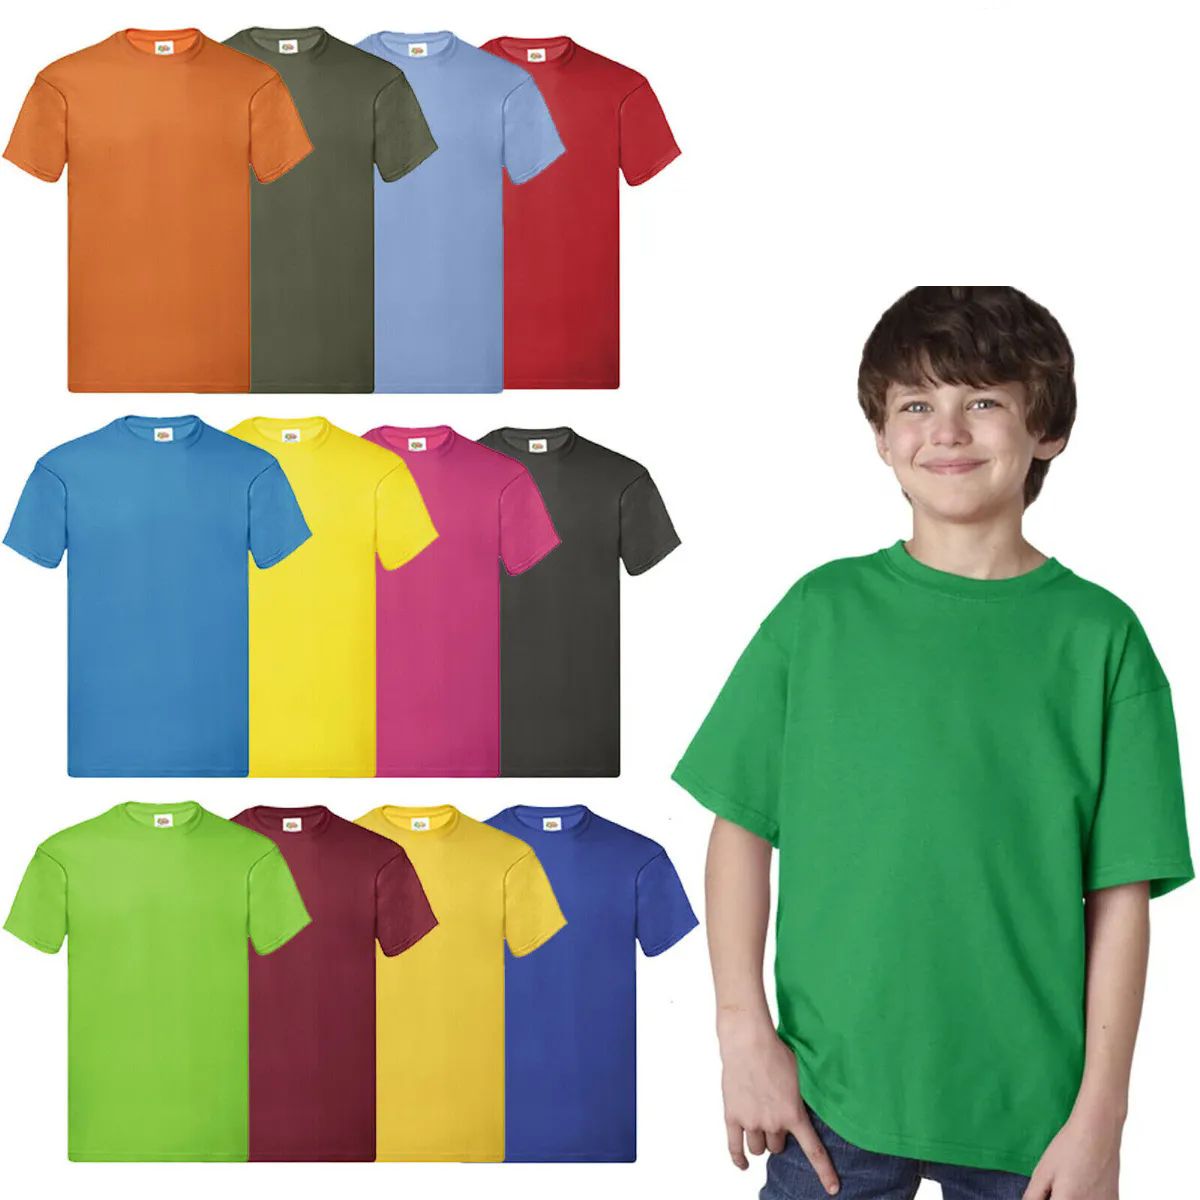 12 Pieces of Billionhats Kids Youth Cotton Assorted Colors T-Shirts Size Xlarge